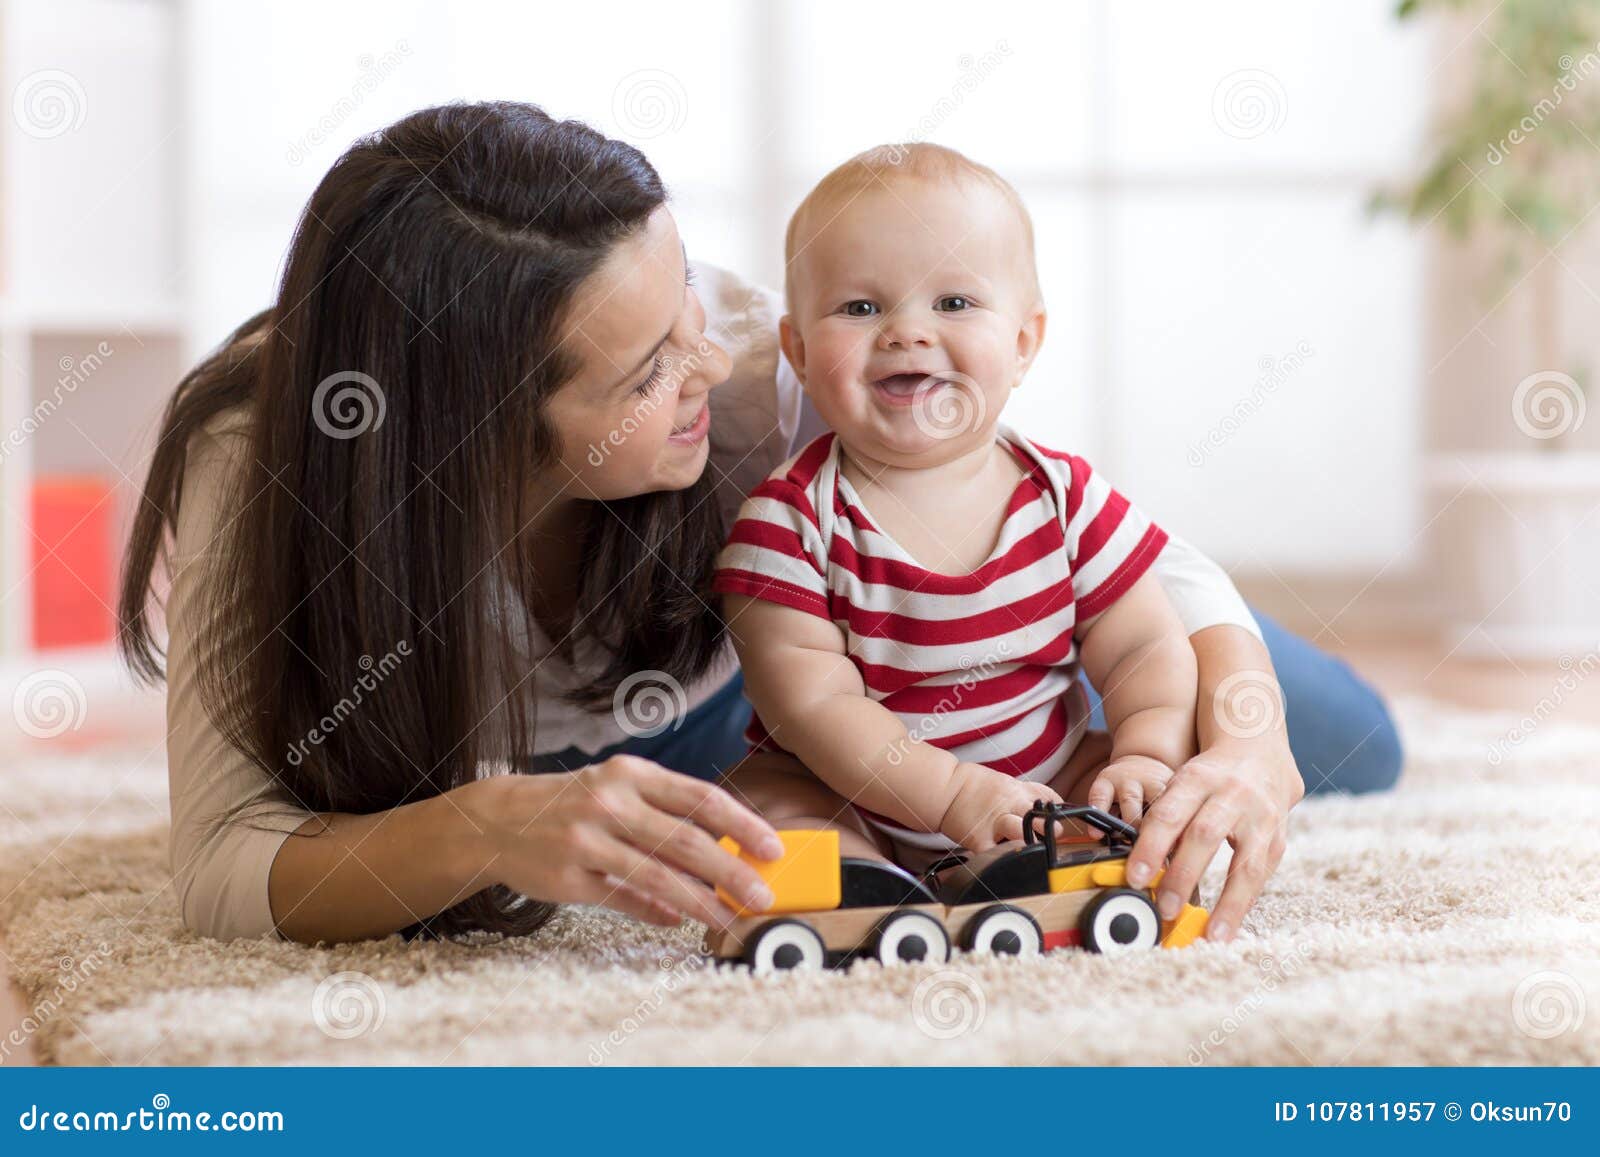 Cute Mother And Child Boy Play Together With Toys Indoors At Home Stock